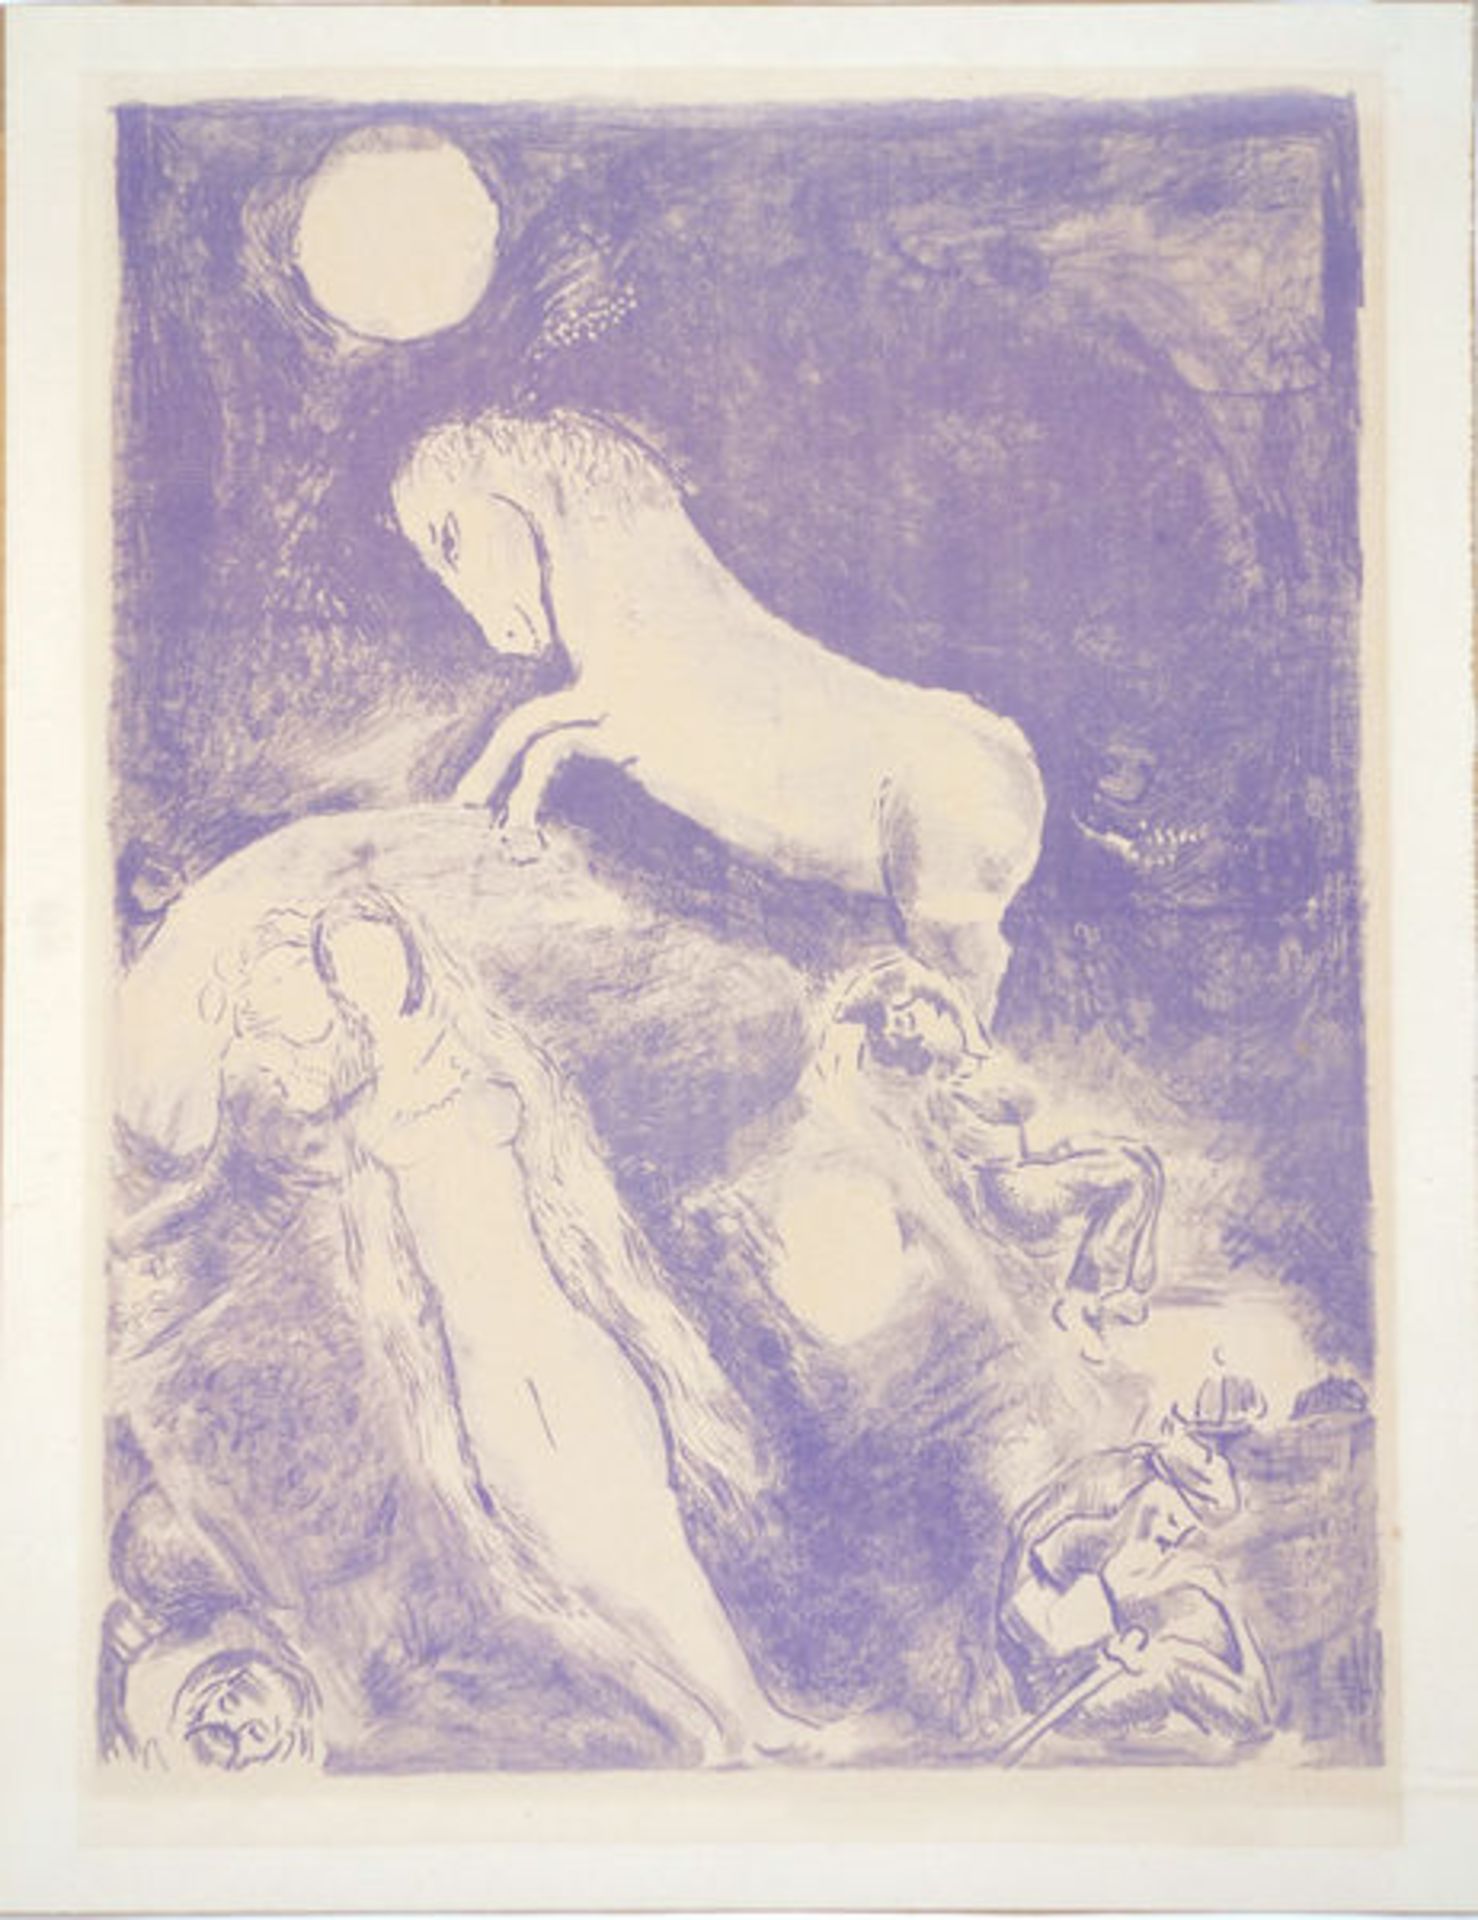 Chagall, Marc Lithographie in Violett auf Papier, 37,7 x 38,5 cm He went up to the couch and found a